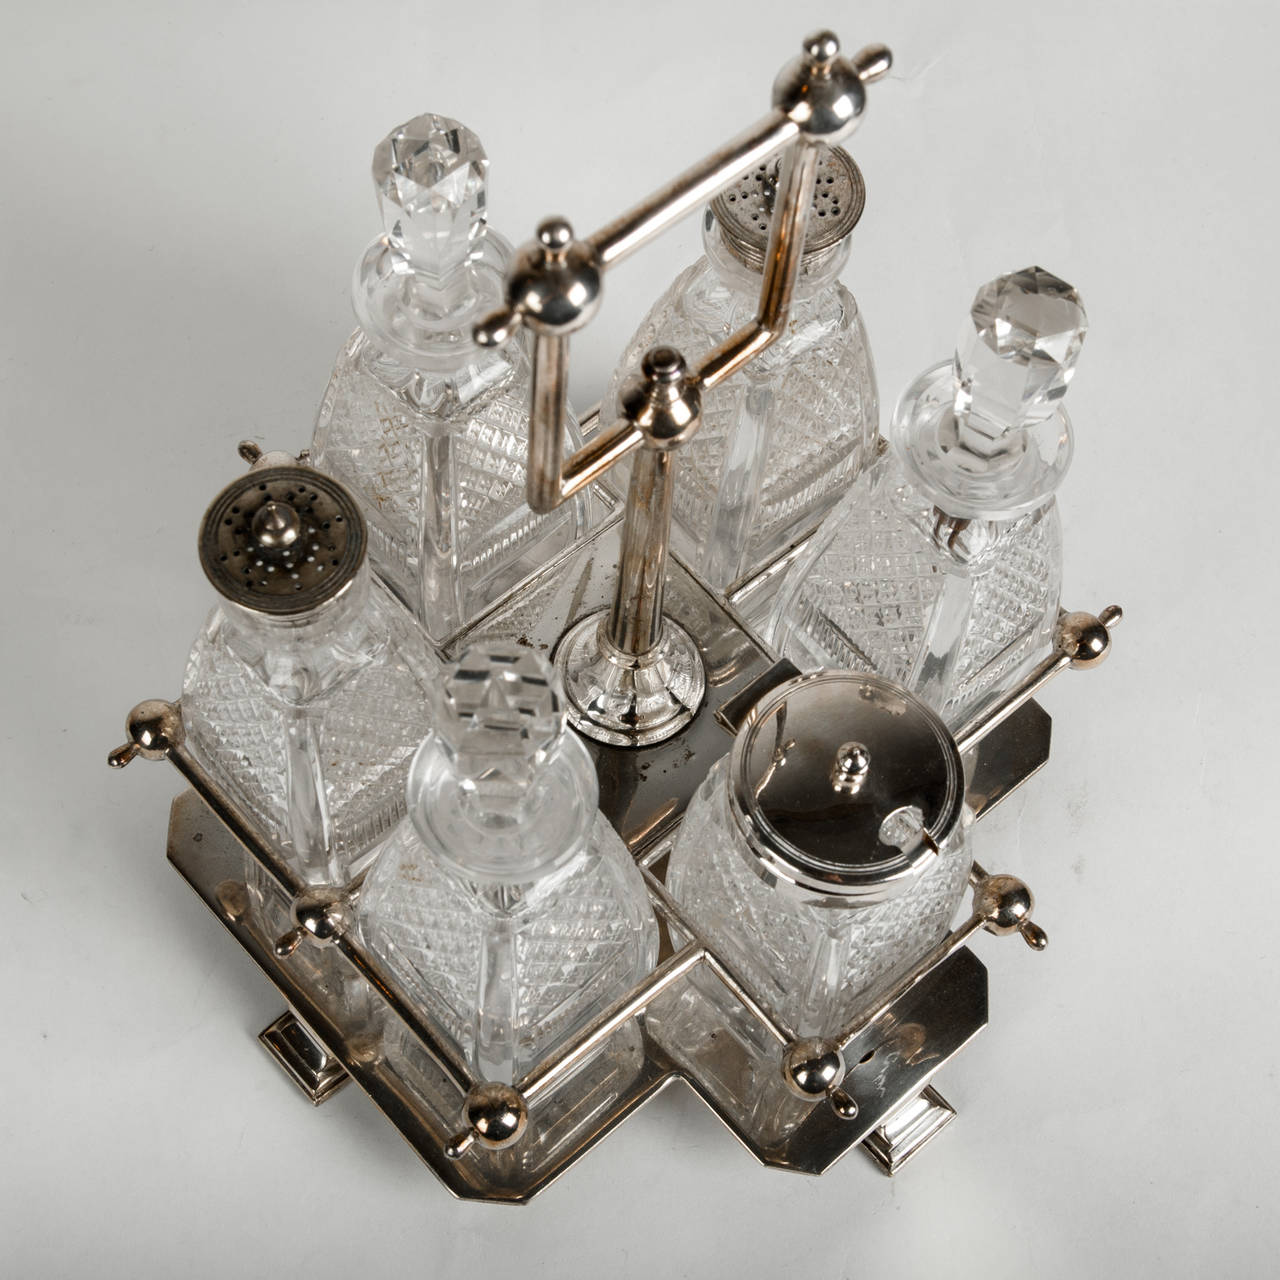 Antique English lead free cut crystal condiment set with silver plate caddie. 12-piece set.